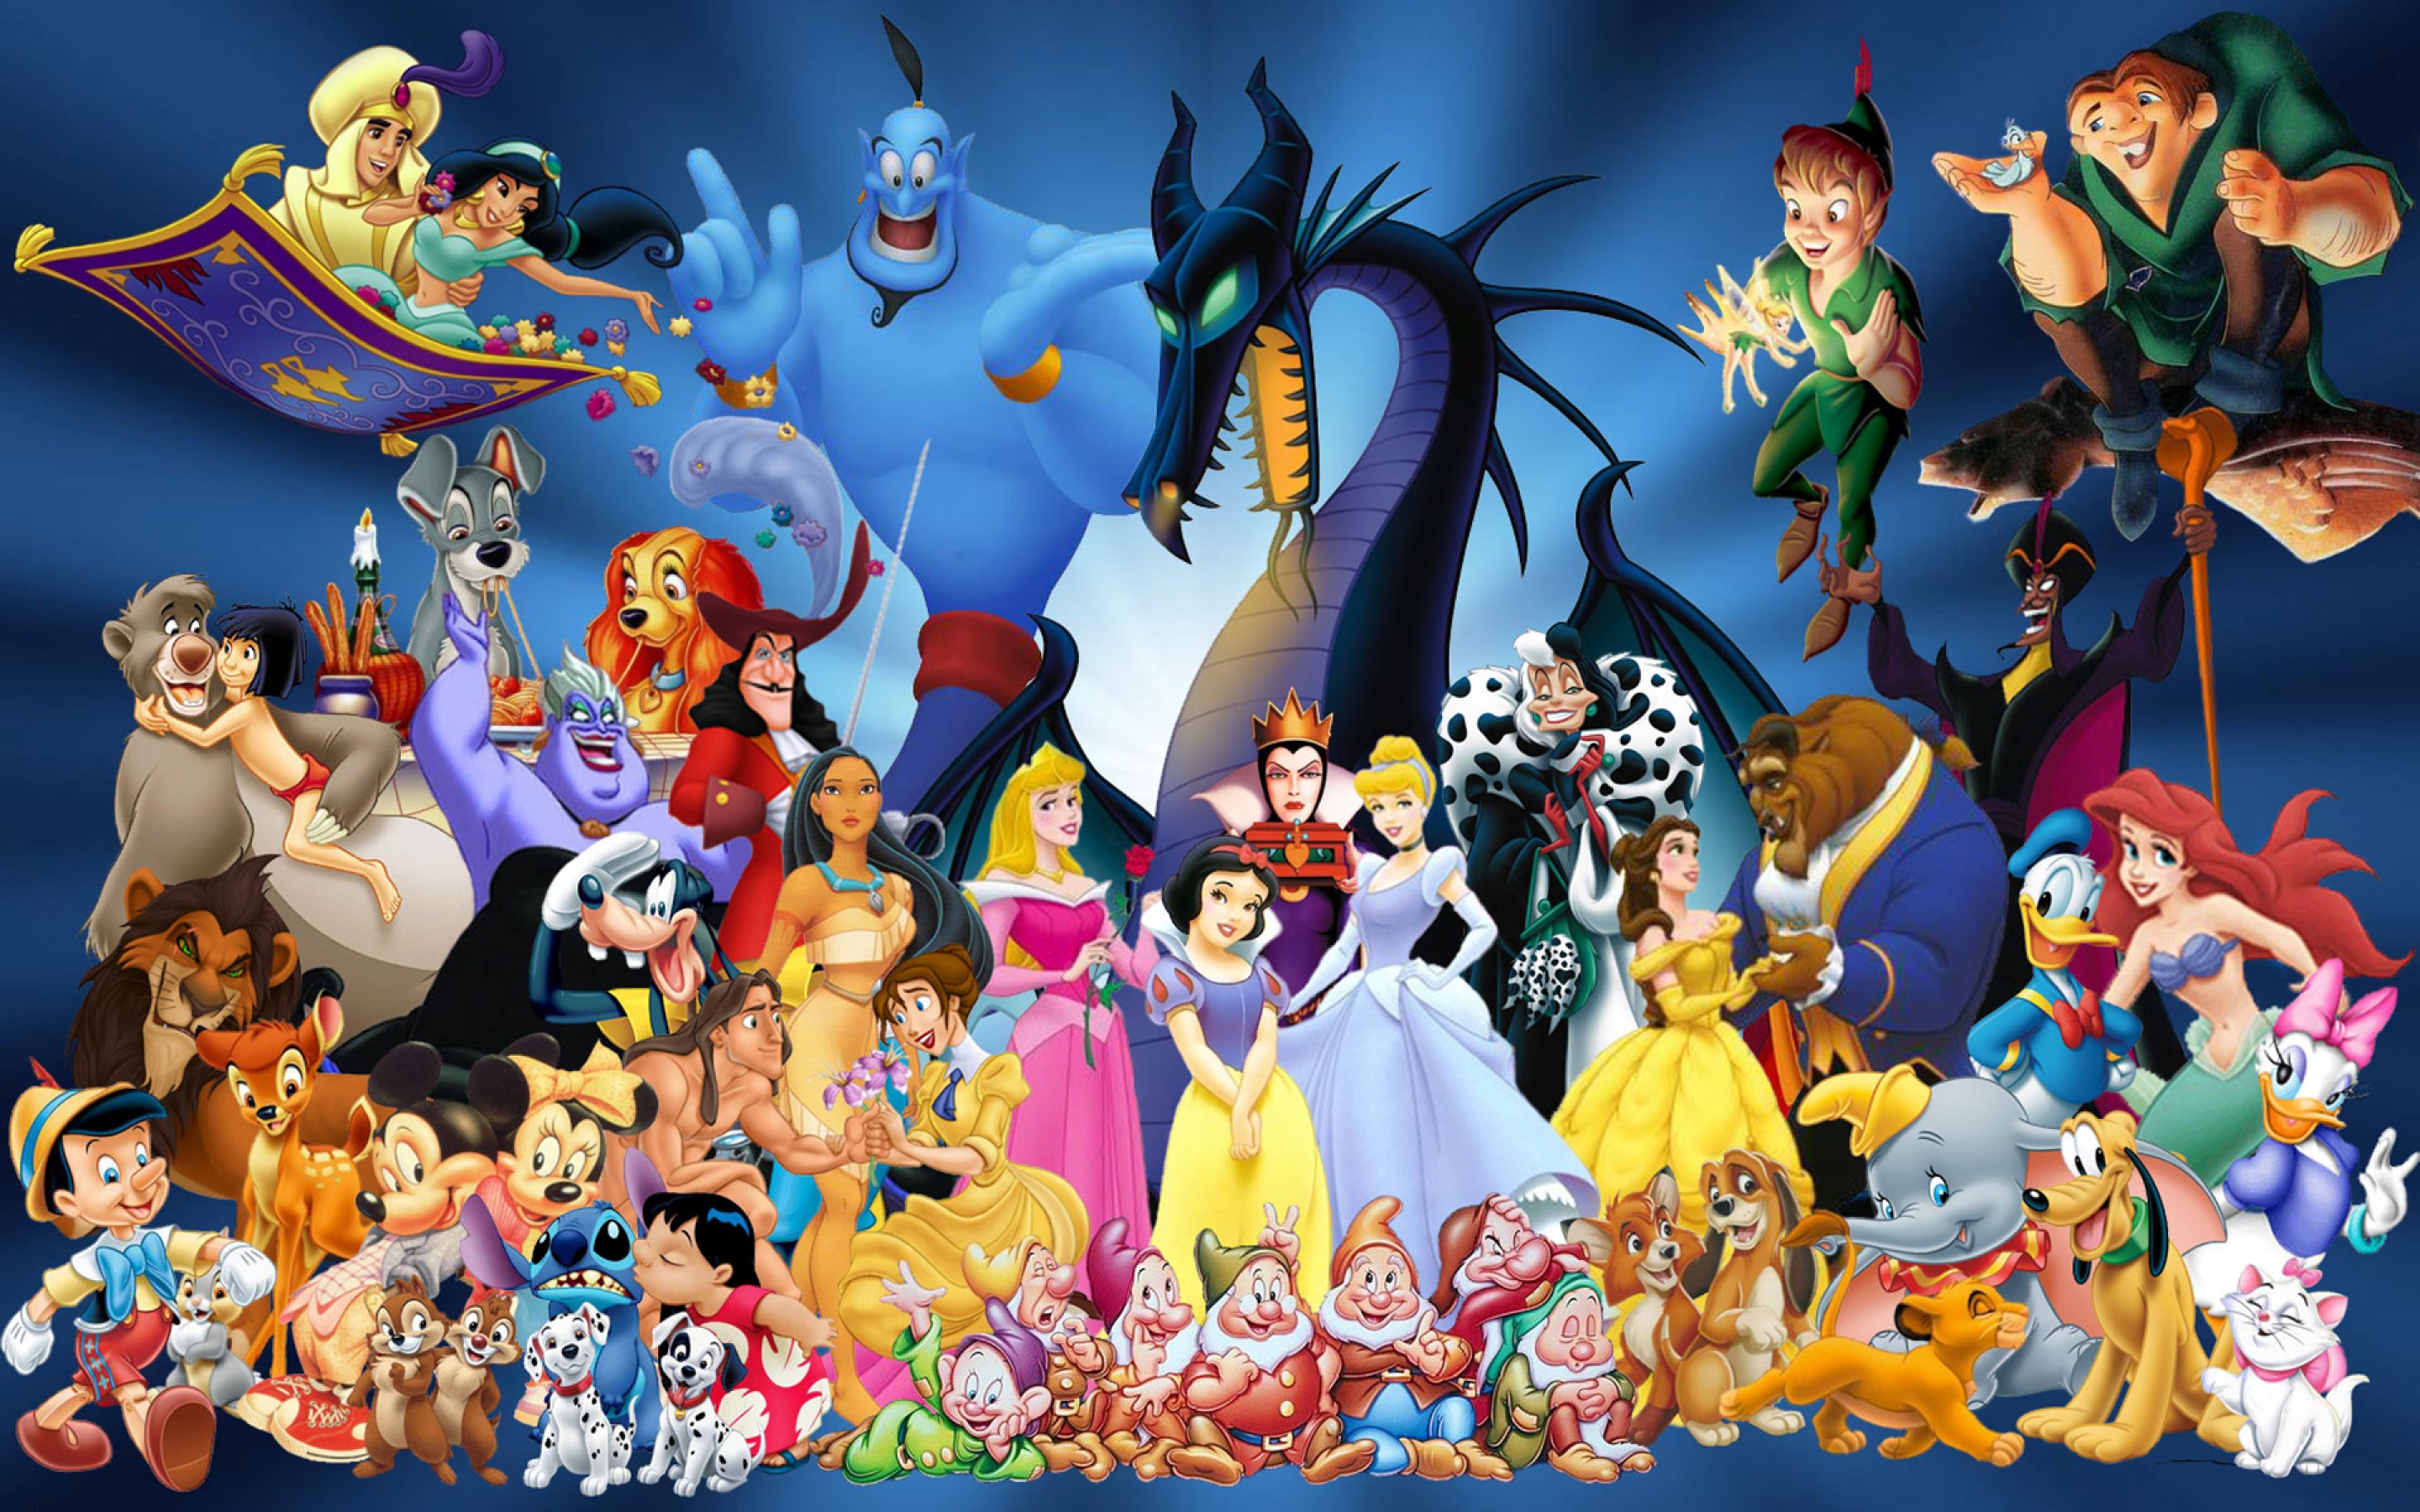 File Name 789230 High Res Disney Wallpapers 789230 Wallpapers